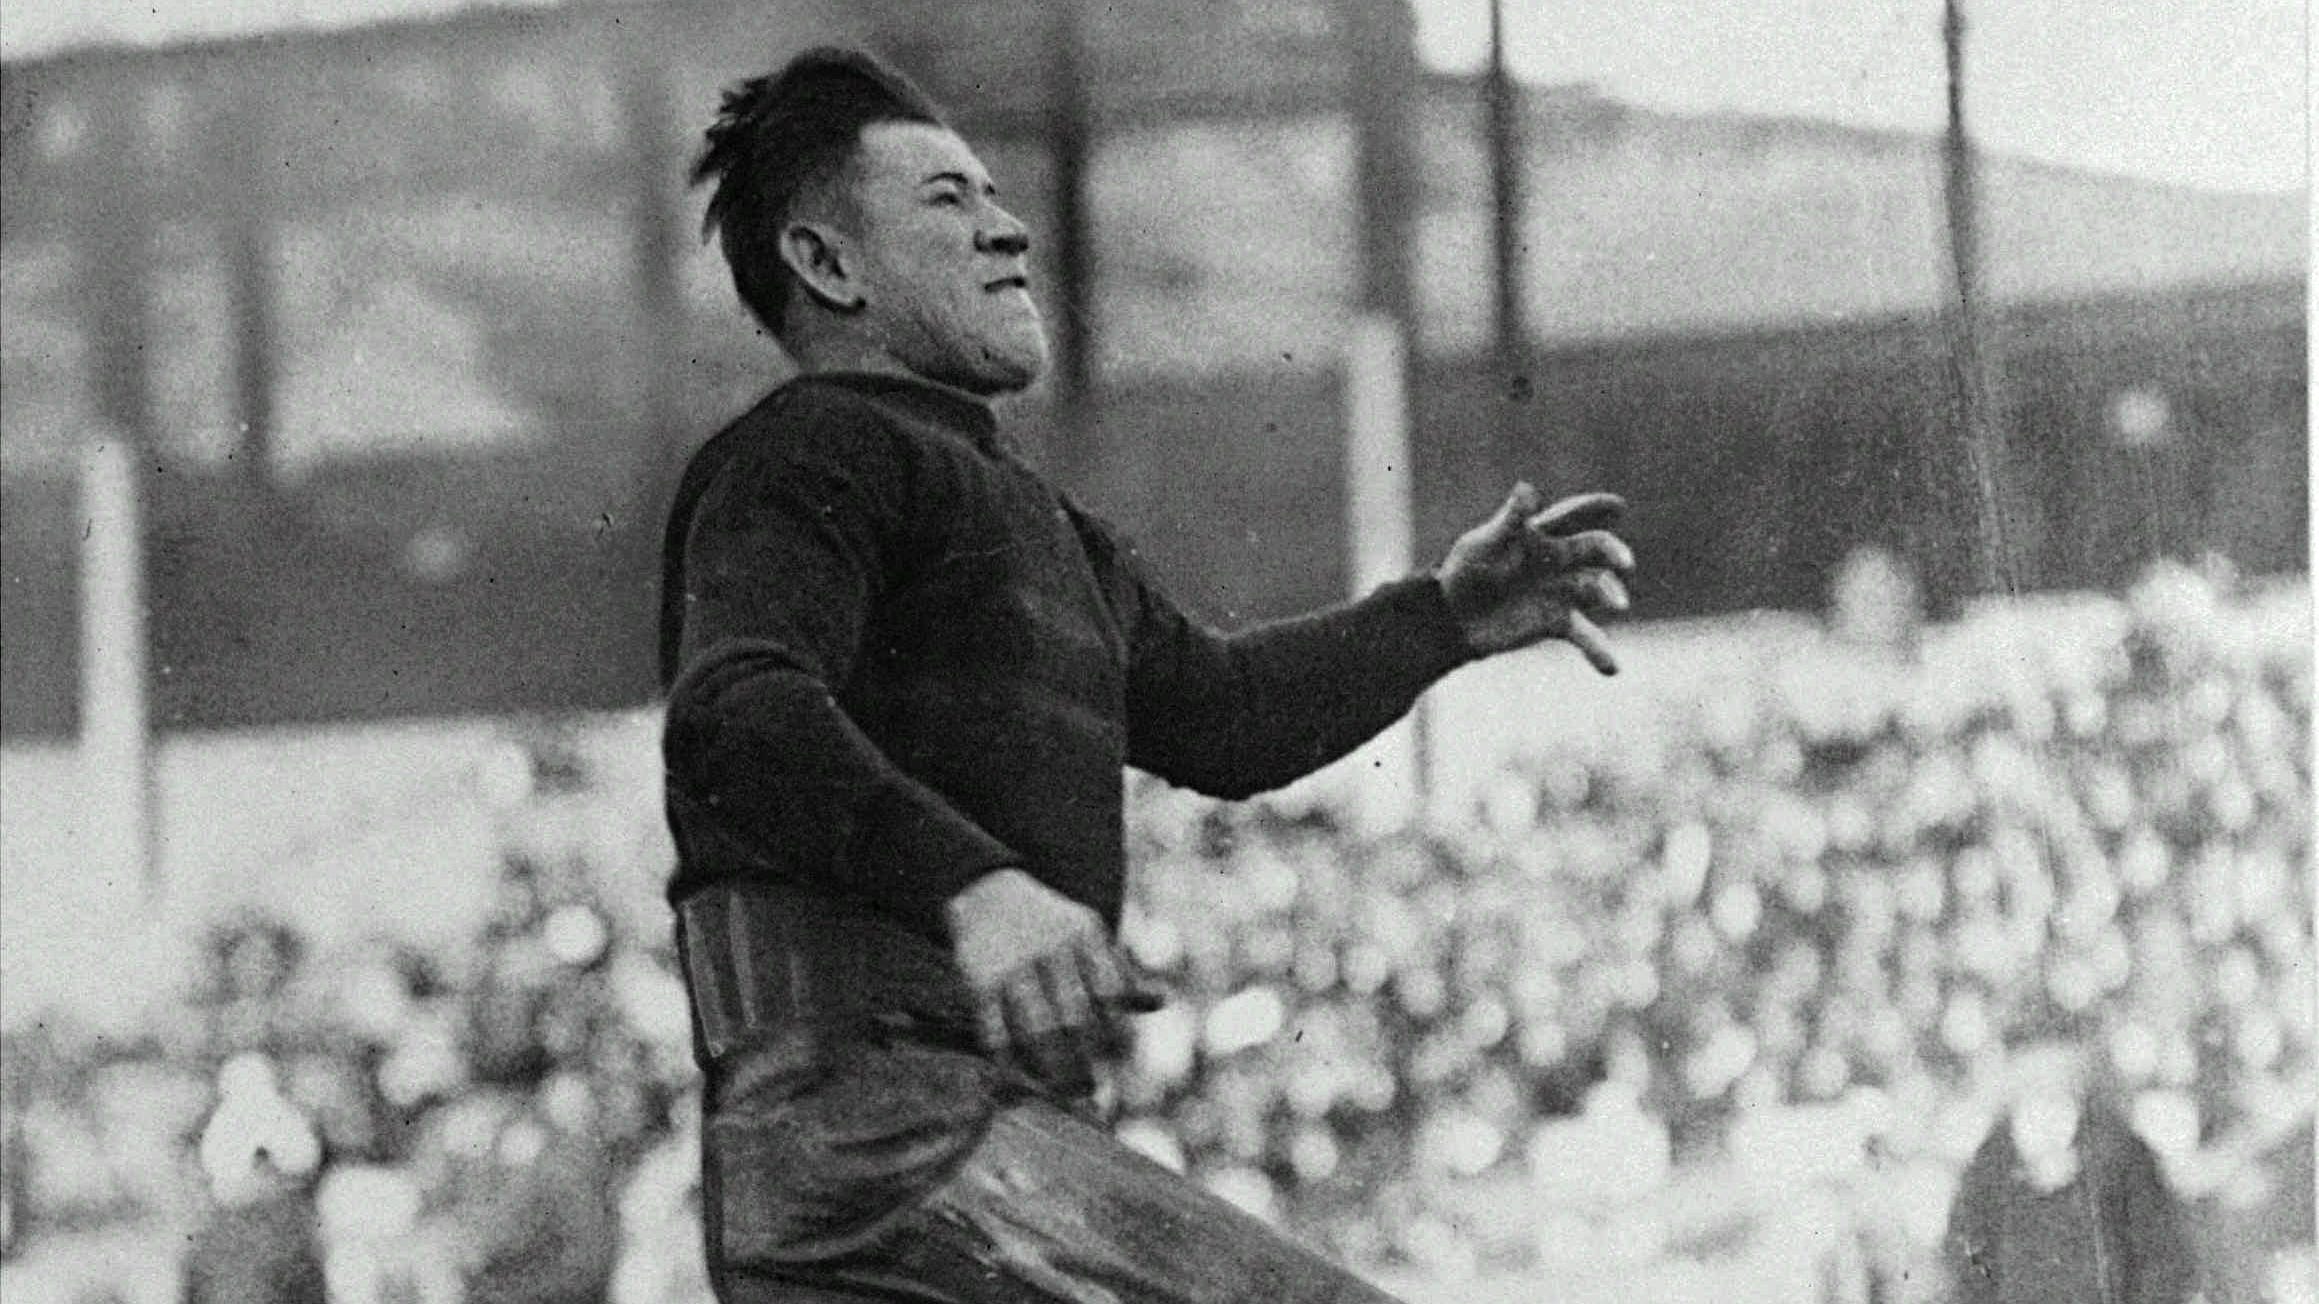 Jim Thorpe: Petition aims to restore 1912 Olympic gold-medal status